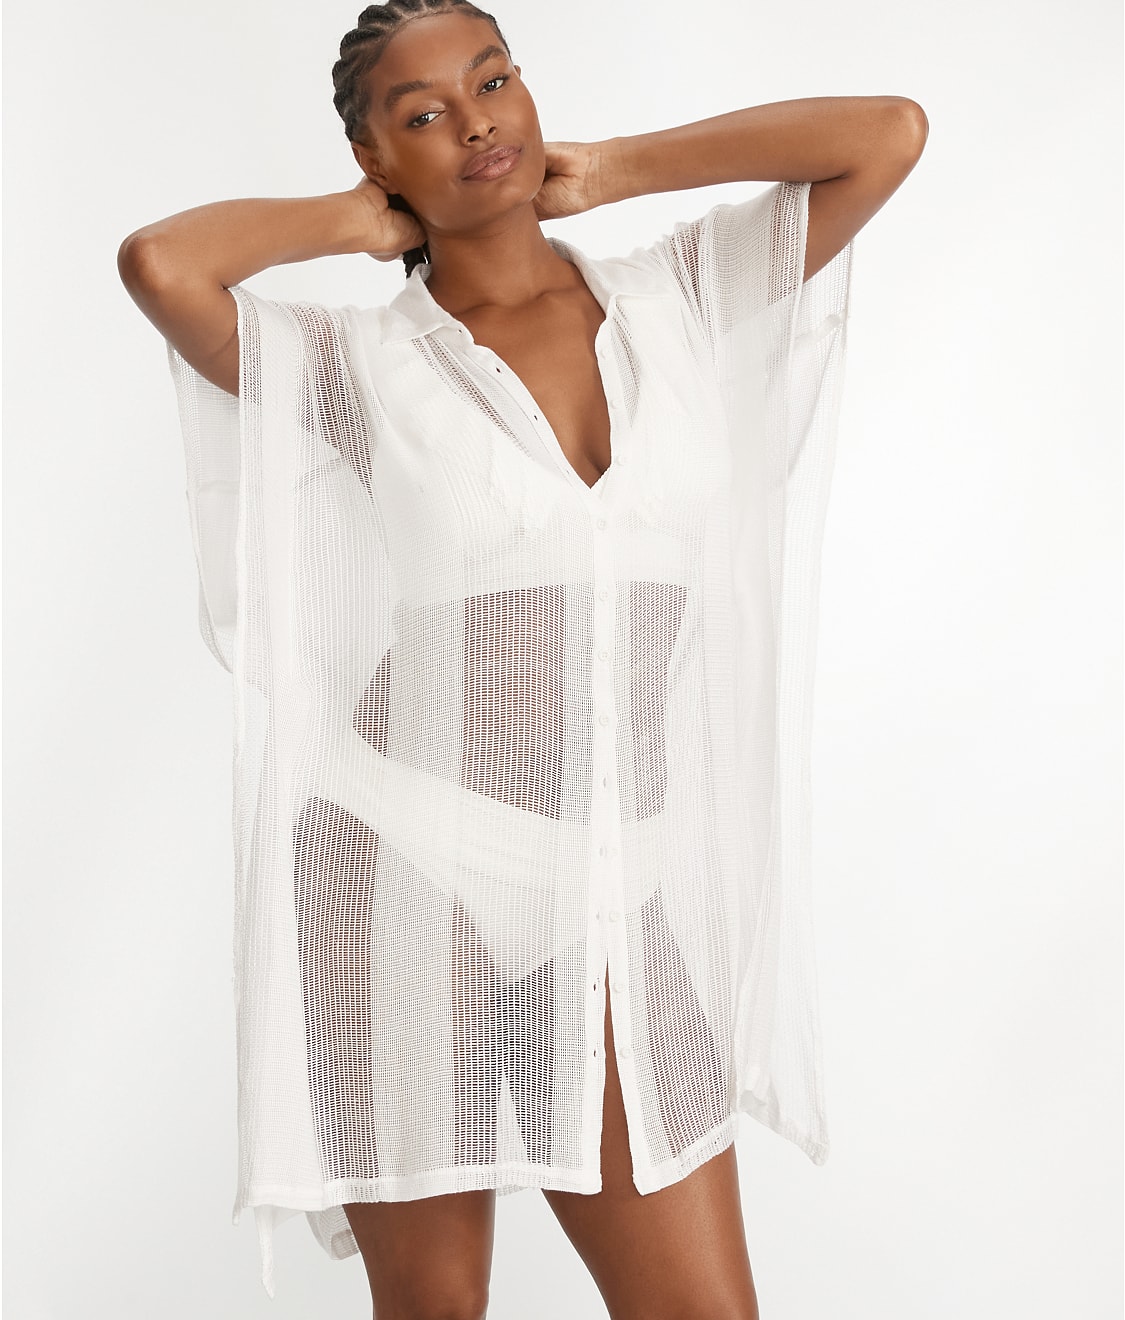 Sunsets: Shore Thing Tunic Cover-Up 181